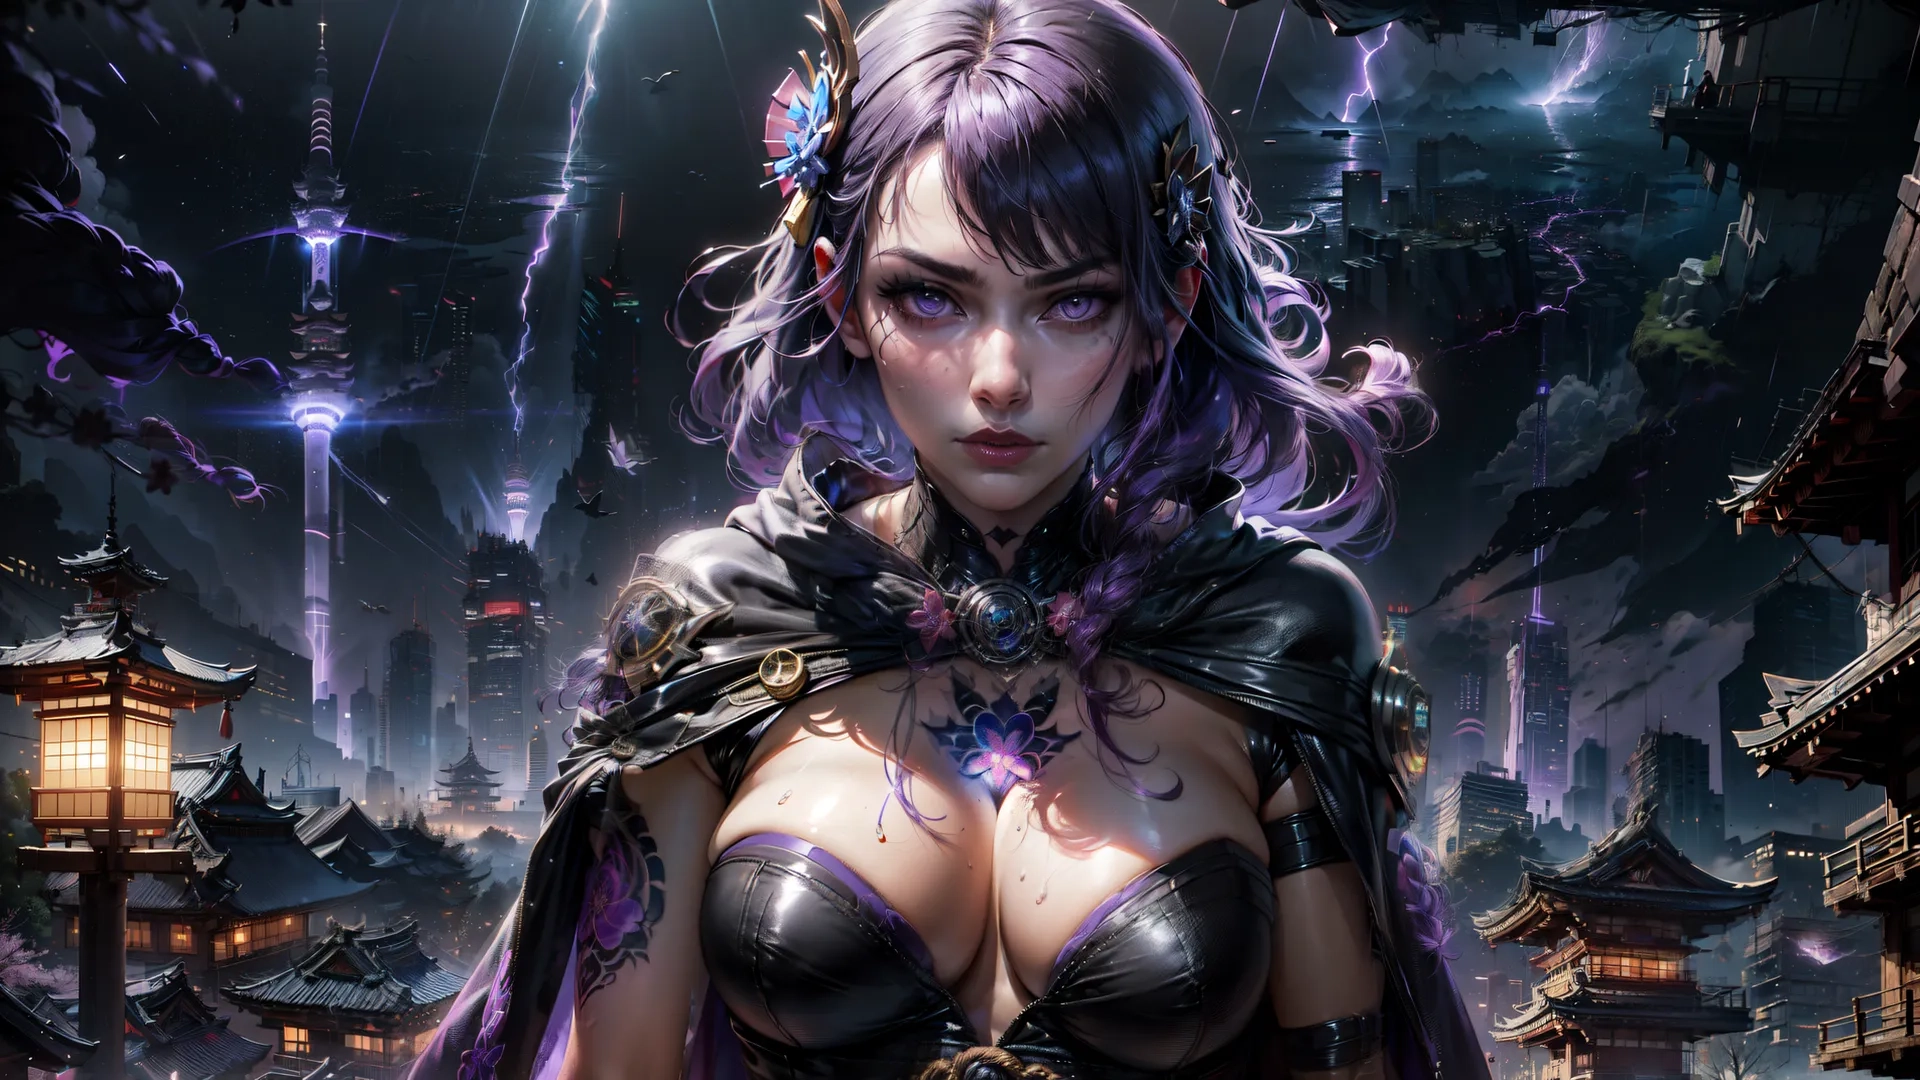 a close up of a person in costume near lightning strikes with capes or armor and purple hair in front of buildings in a city
